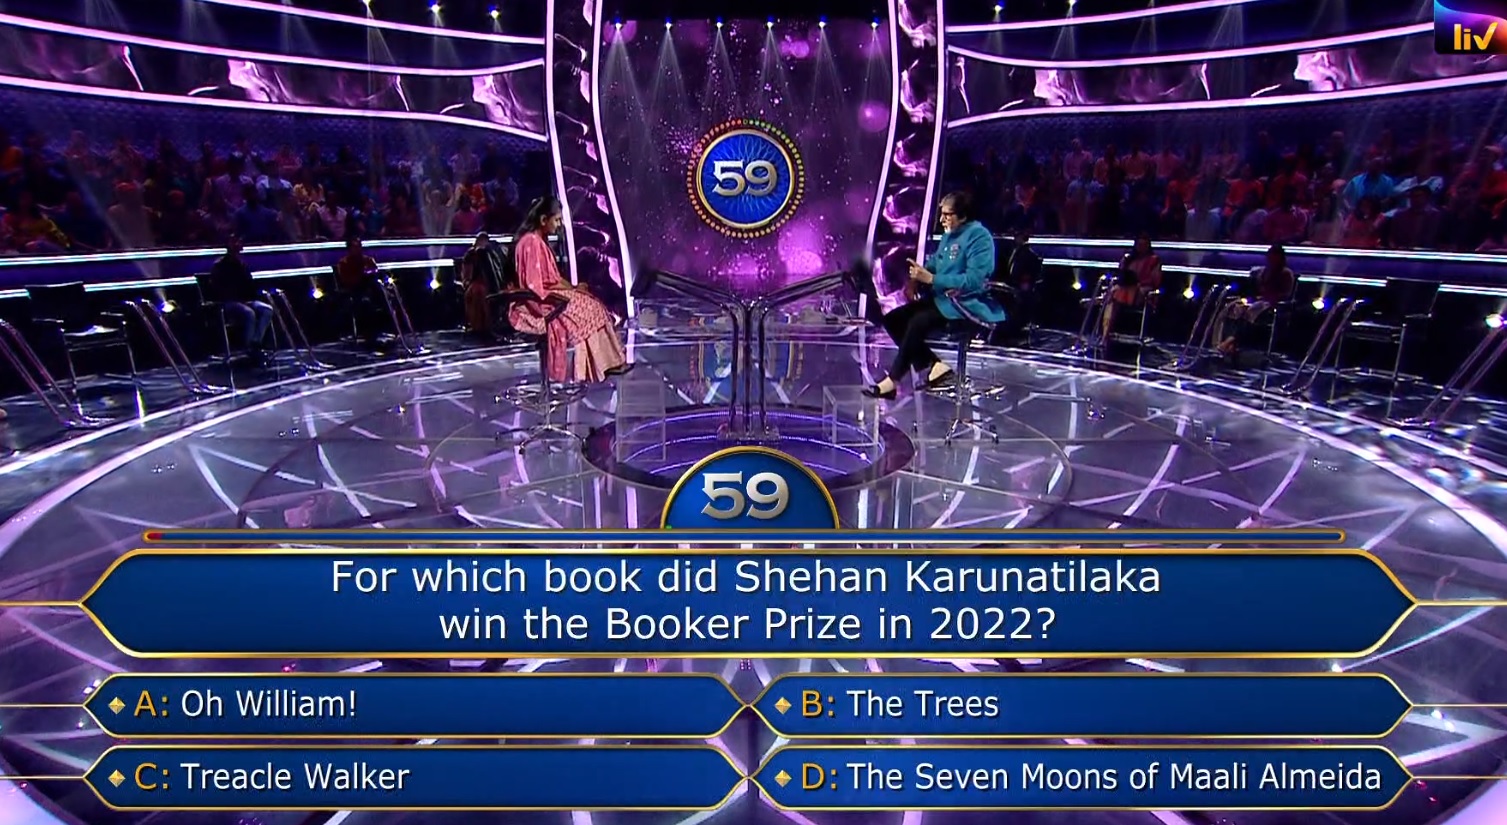 Ques : For which book did Shehan Karunatilaka win the Booker Prize in 2022?